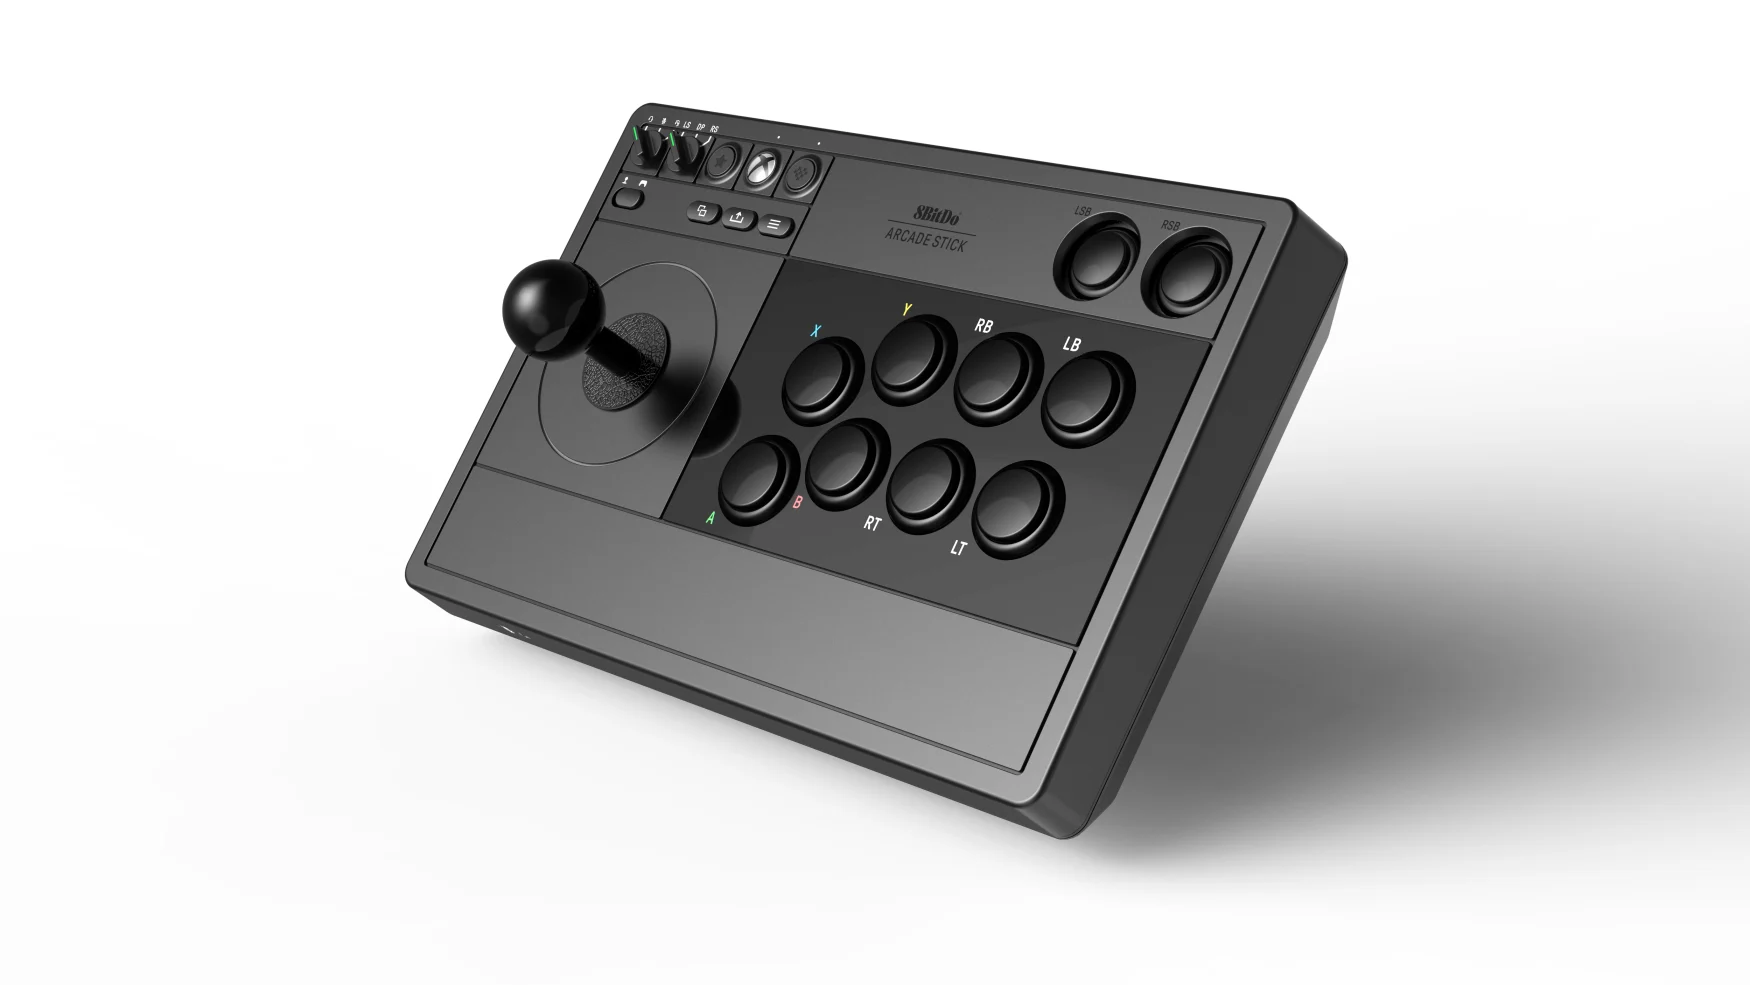 Marketing image for the 8BitDo Arcade Stick for Xbox in black. The accessory, with an arcade-style joystick and 10 buttons, sits at an angle in front of a neutral white background